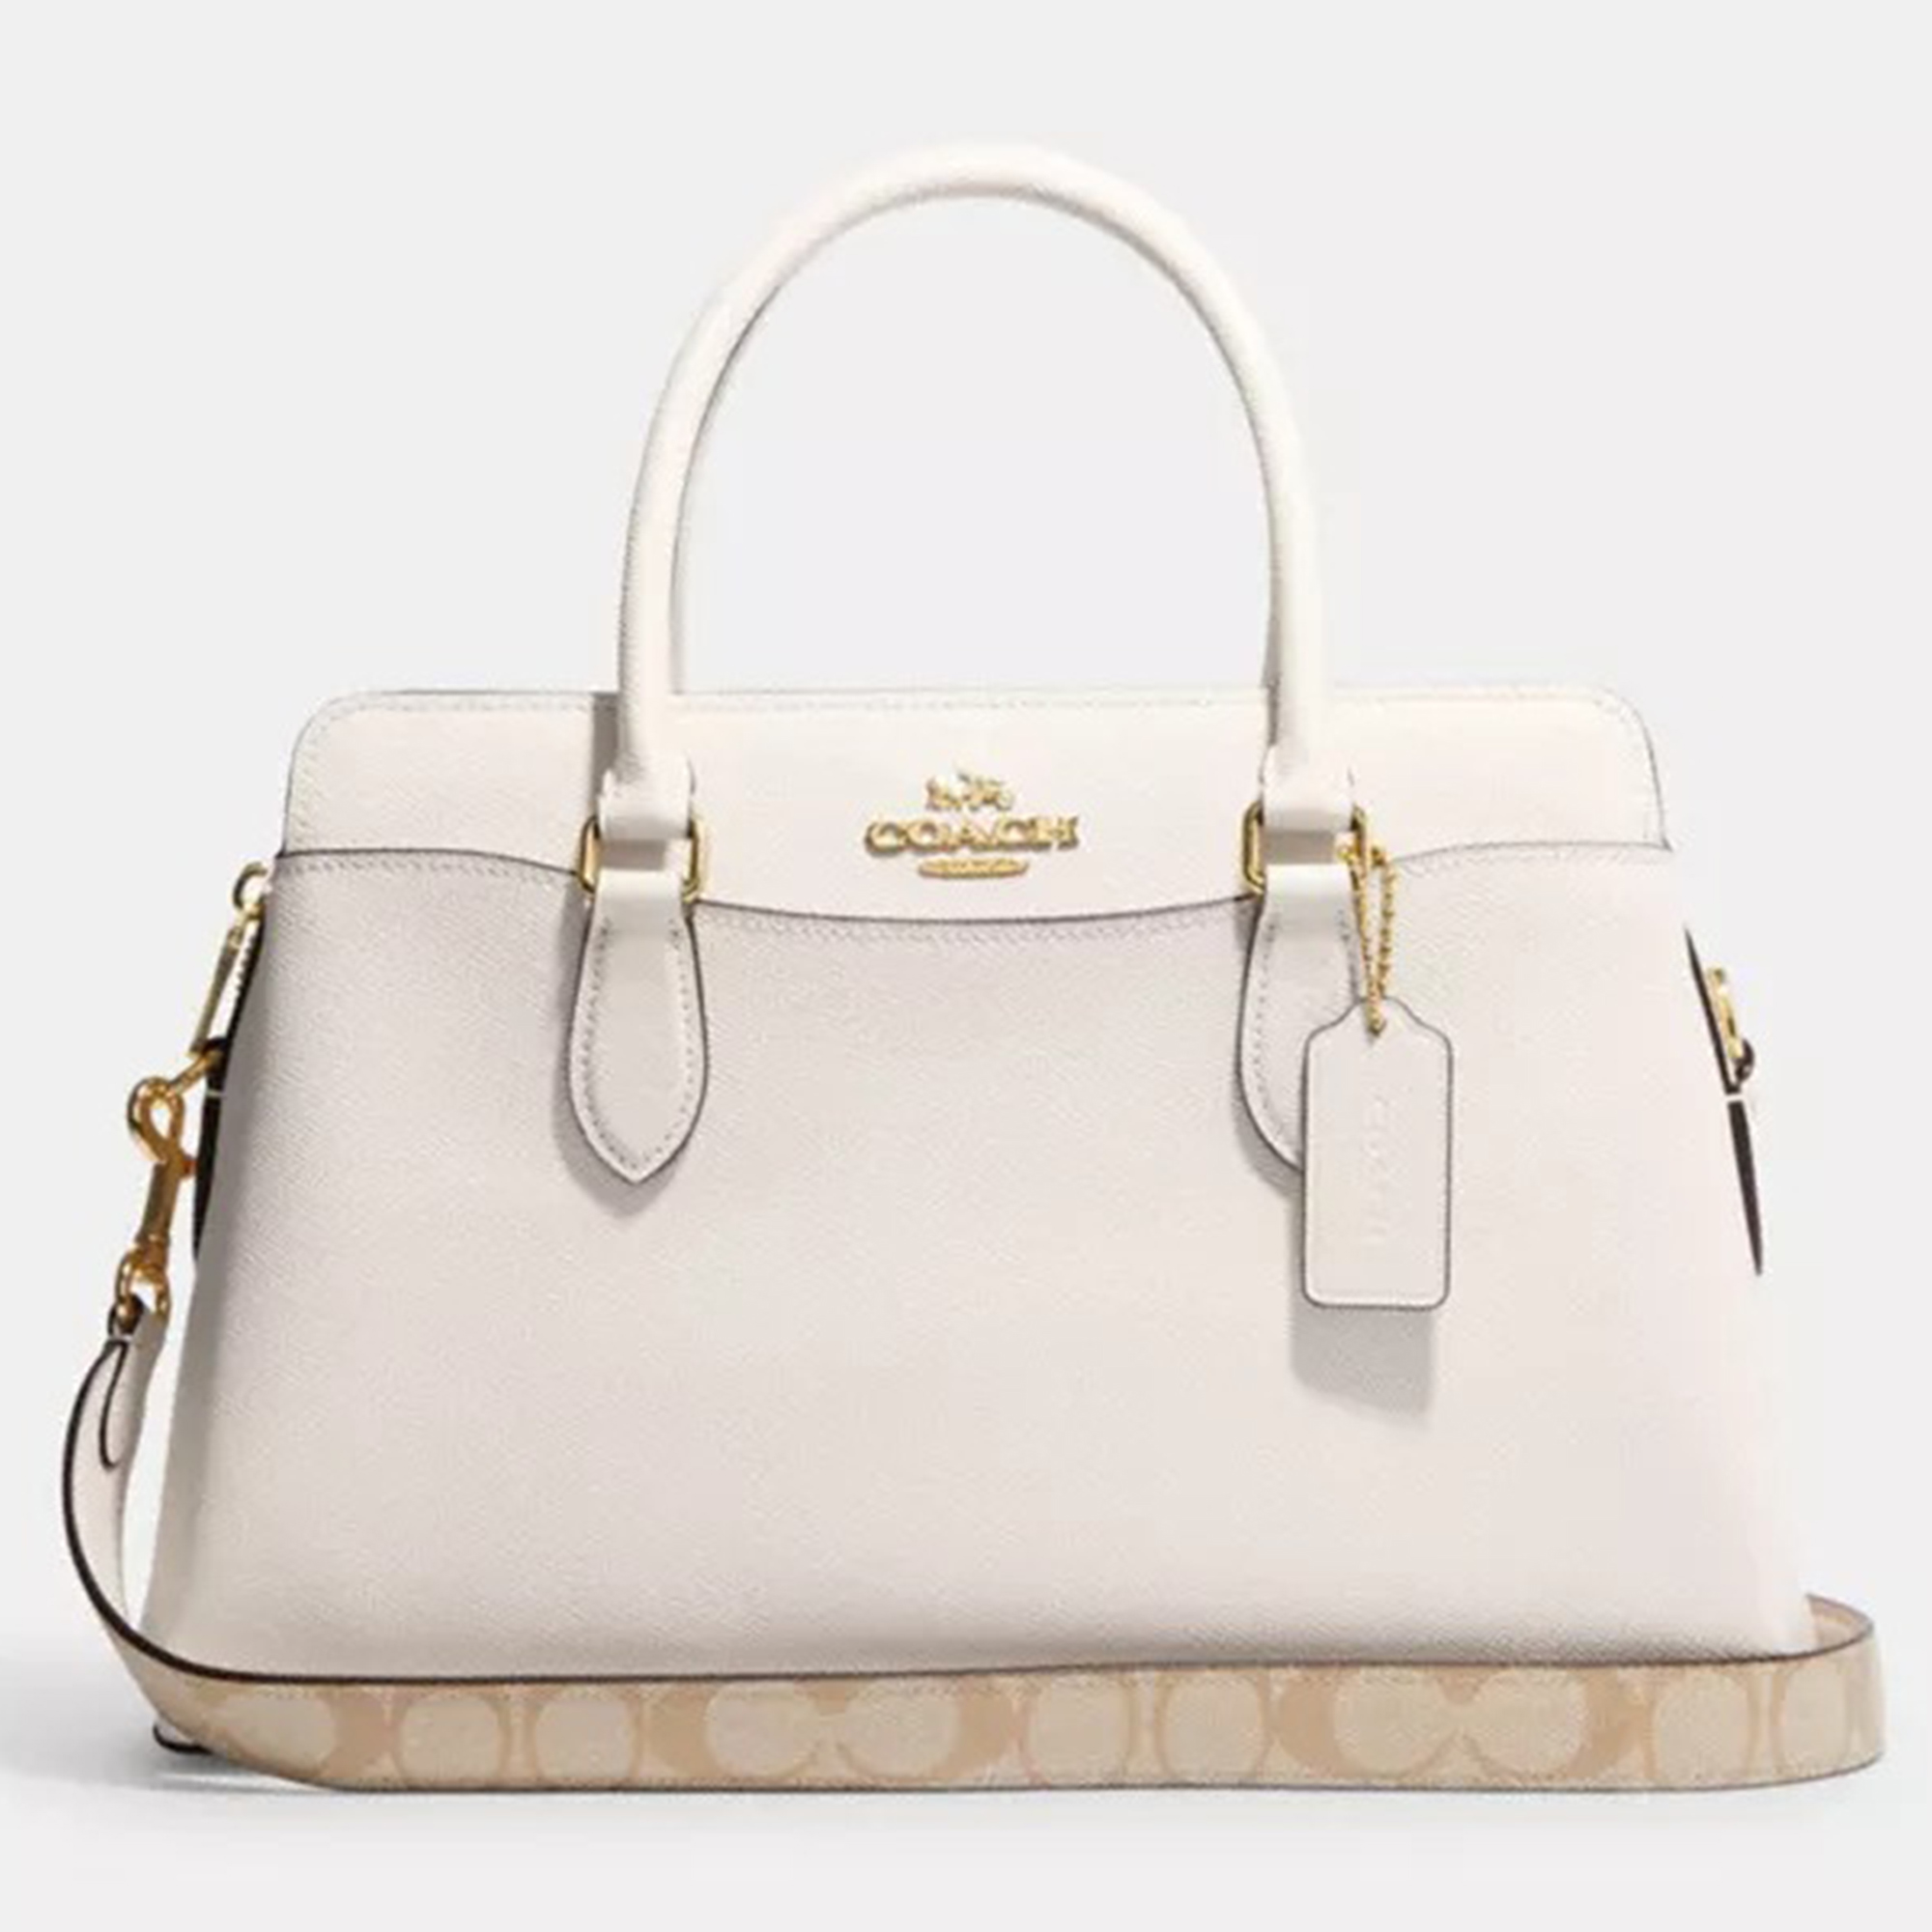 Coach White/Beige Signature Canvas And Leather Darcie Carryall Bag